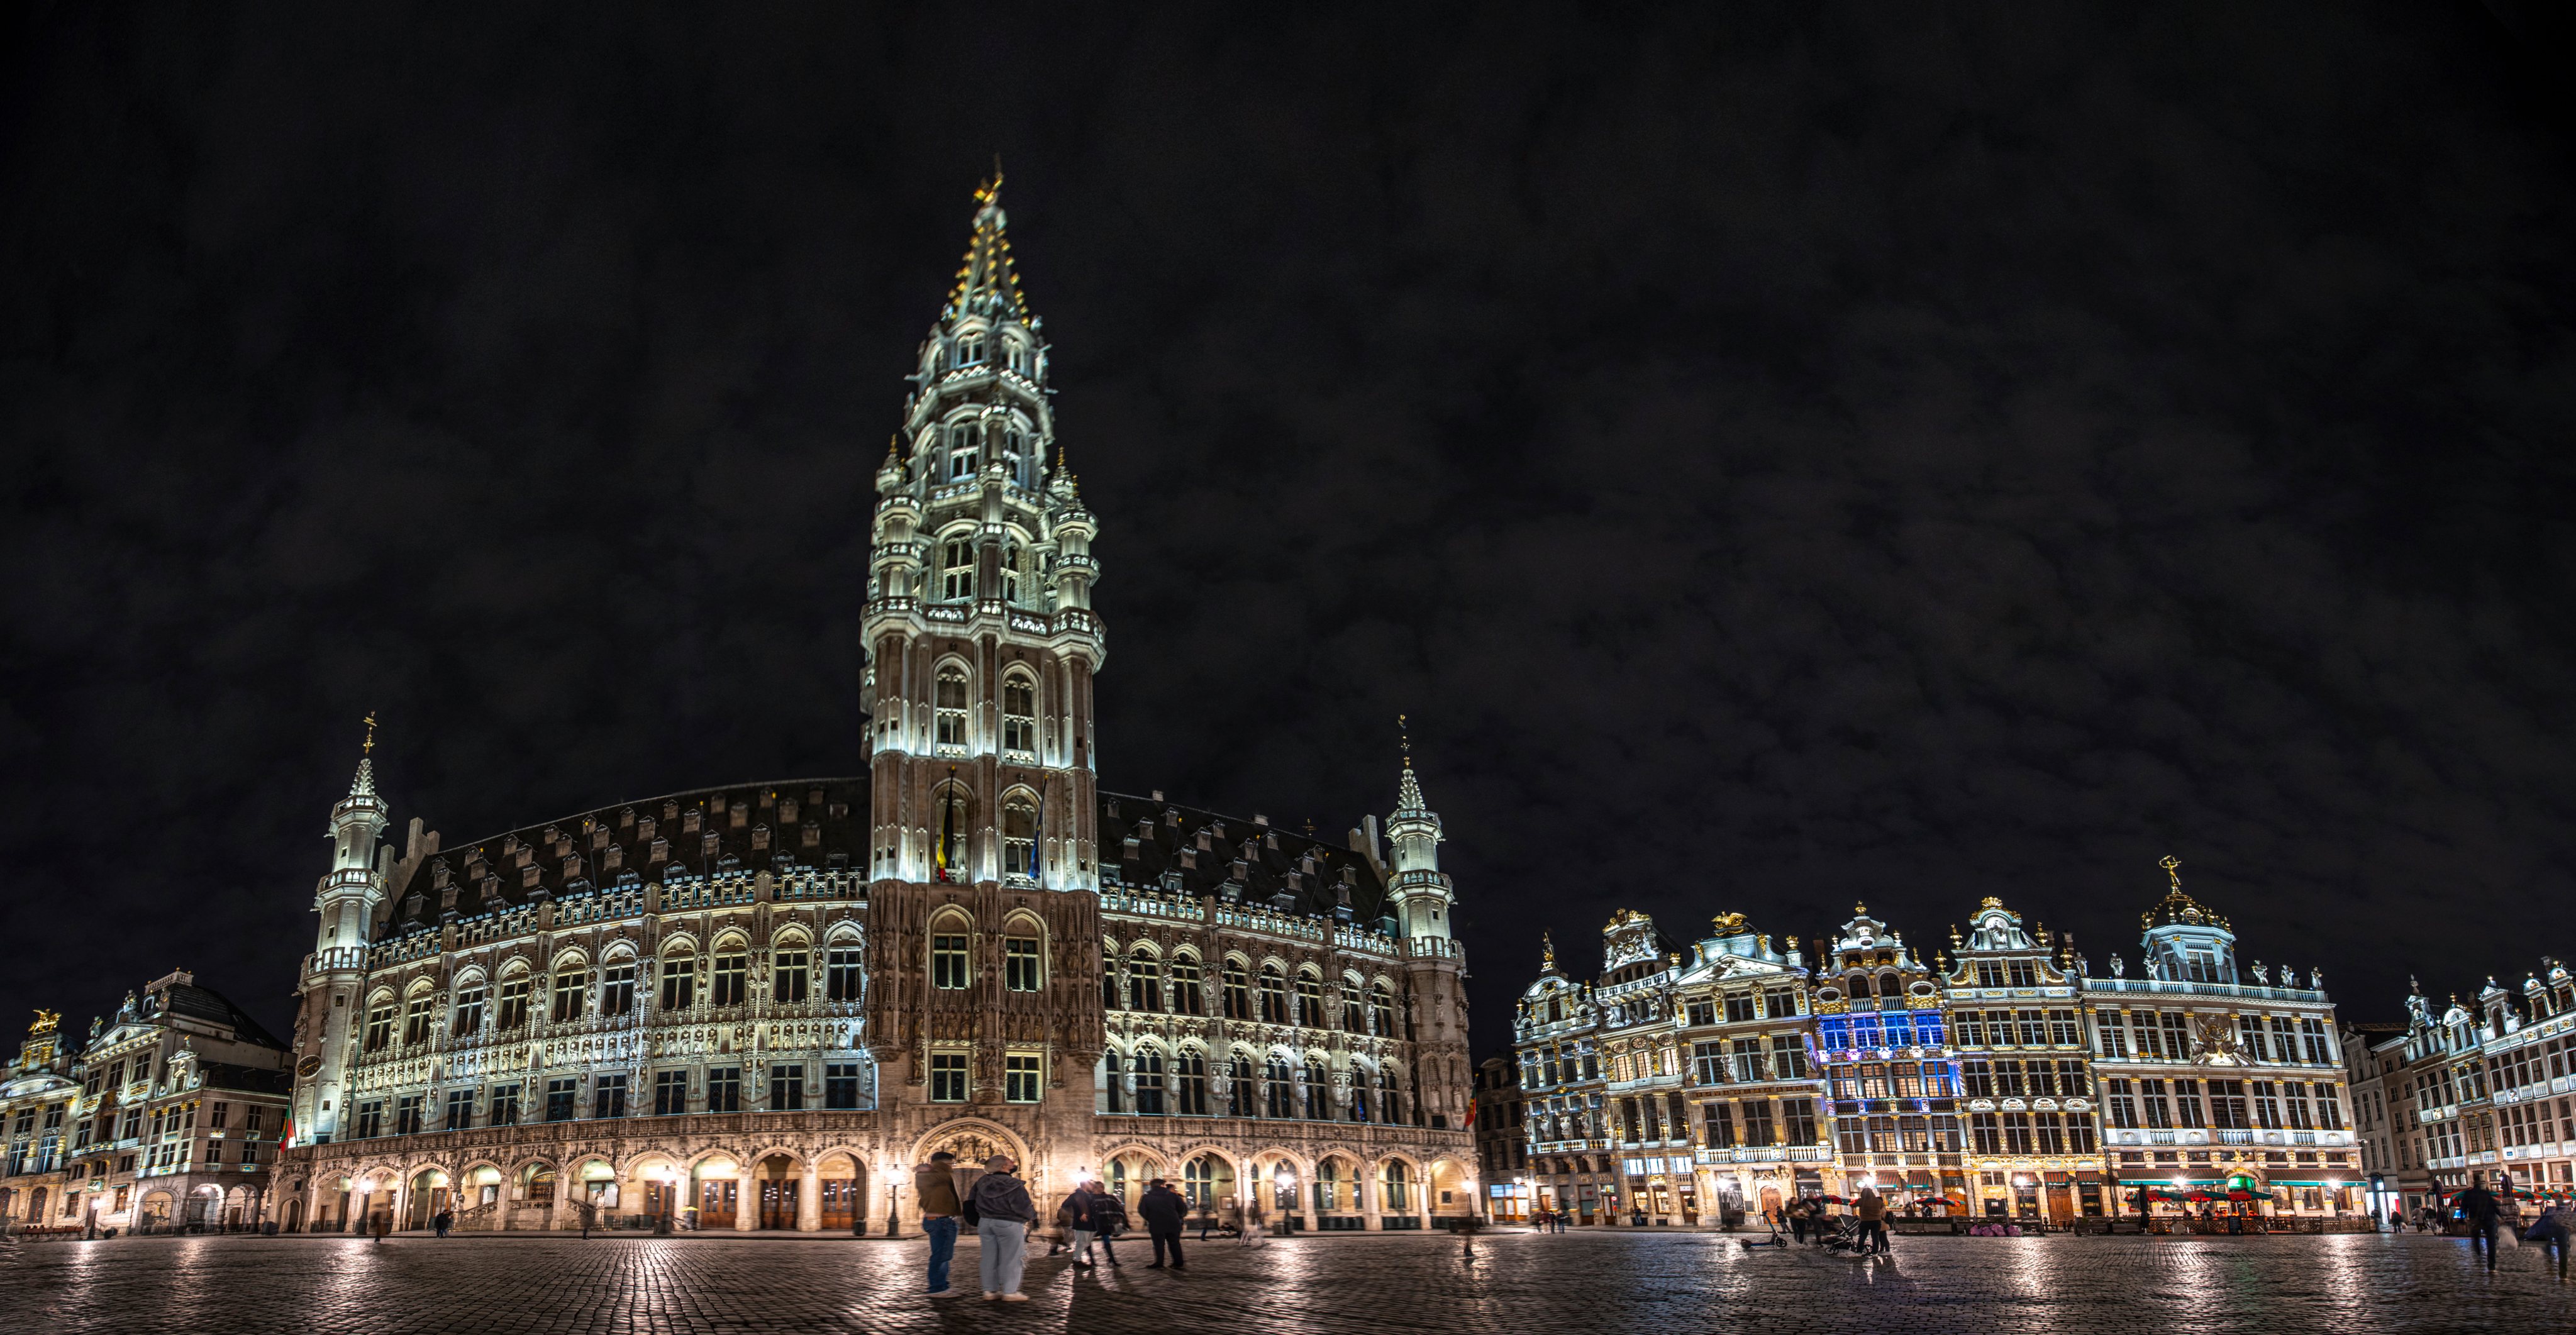 Illuminated Grand Place Square In Brussels